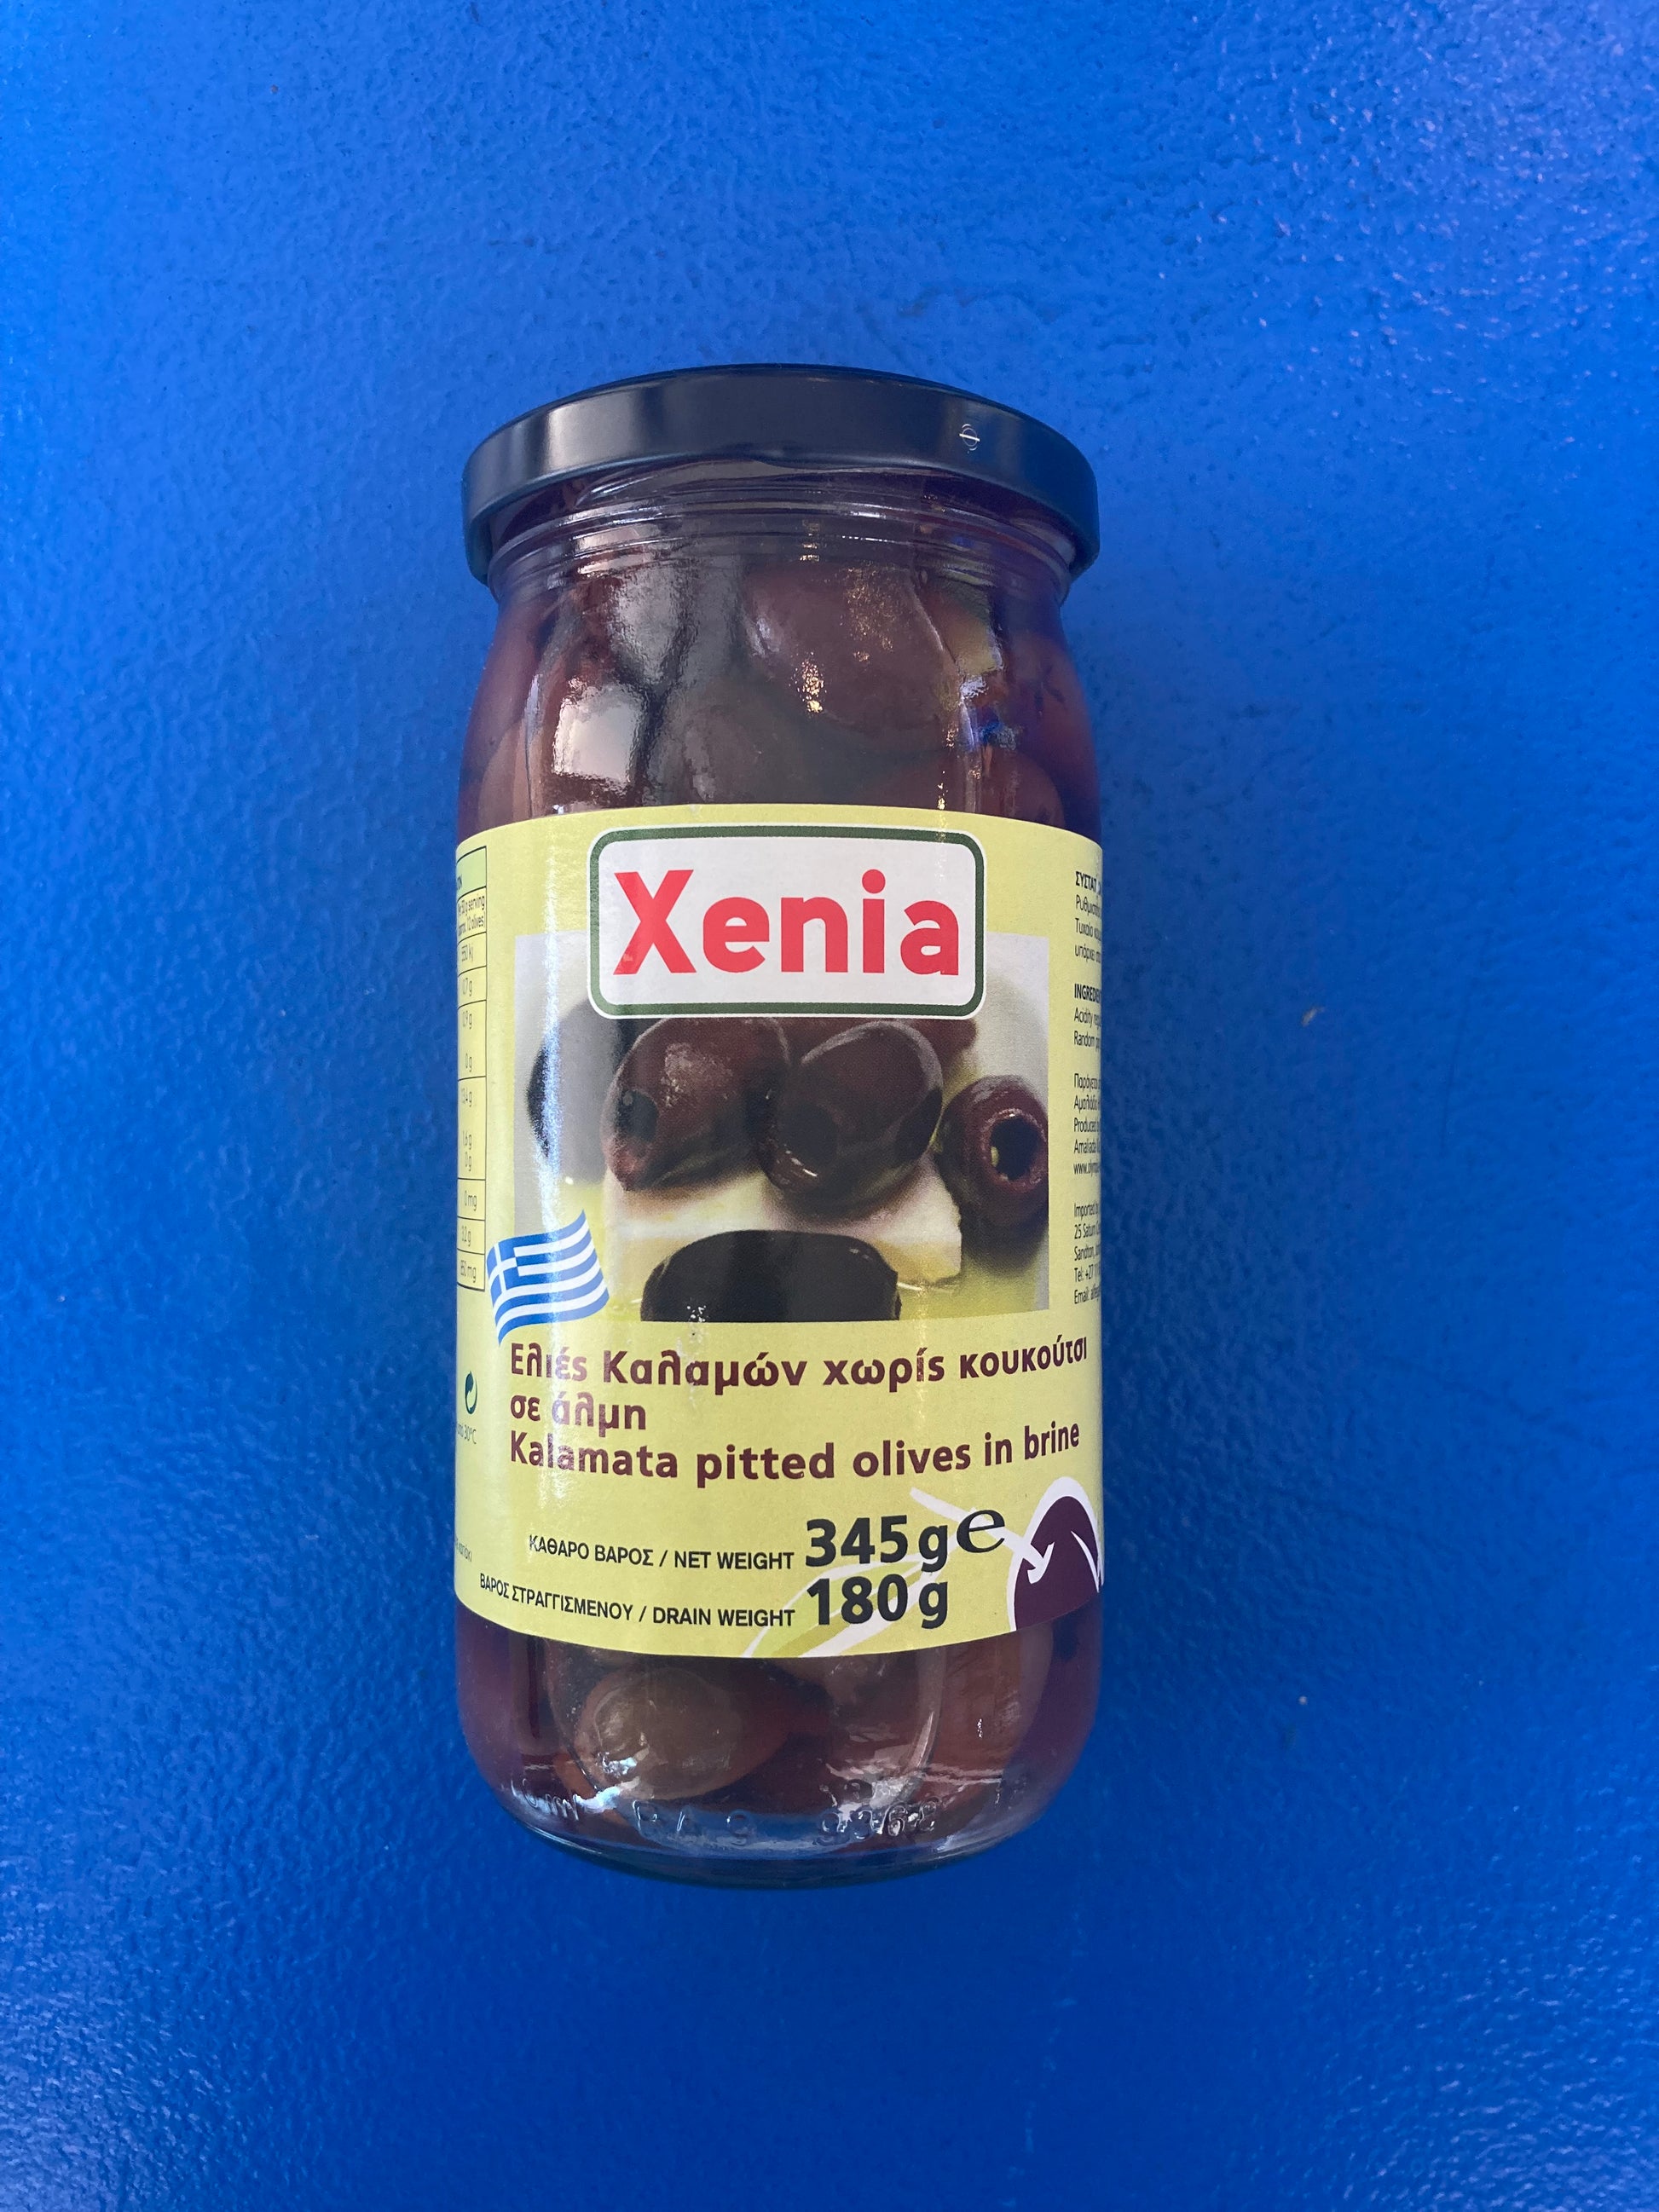 Xenia Kalamata pitted olives in brine